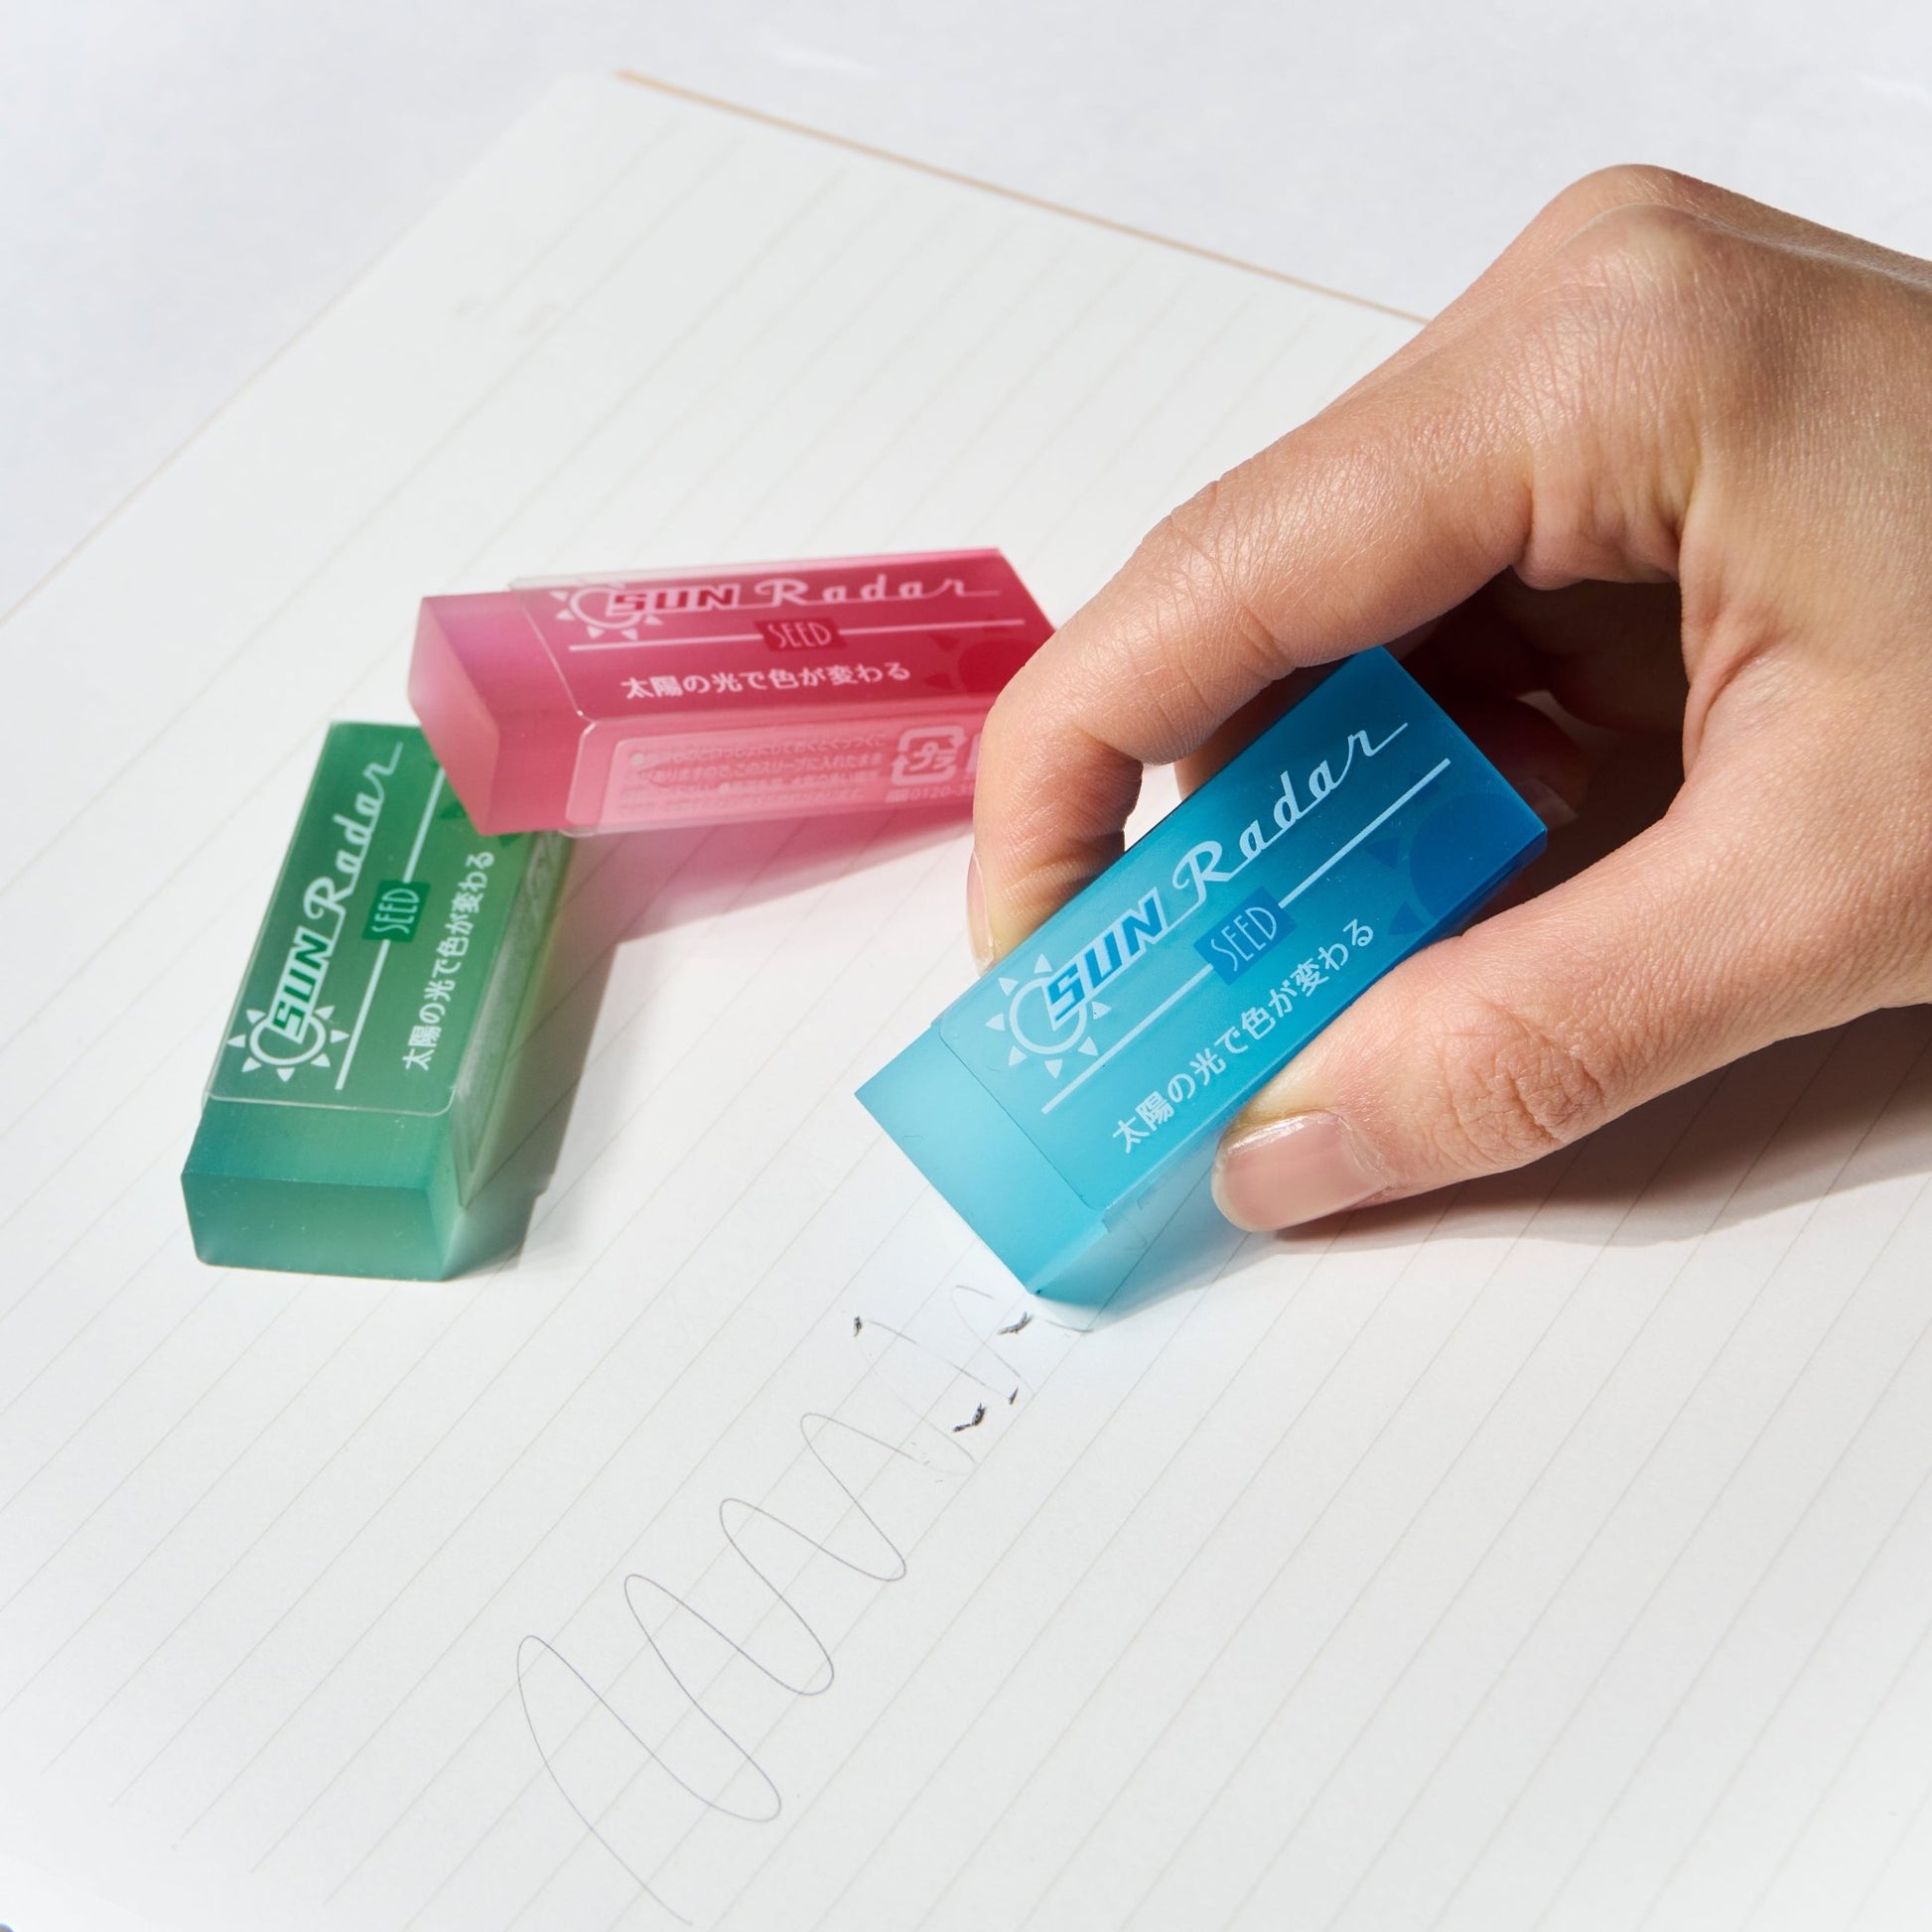 seed's translucent 'clear radar' eraser lets users see what they are erasing